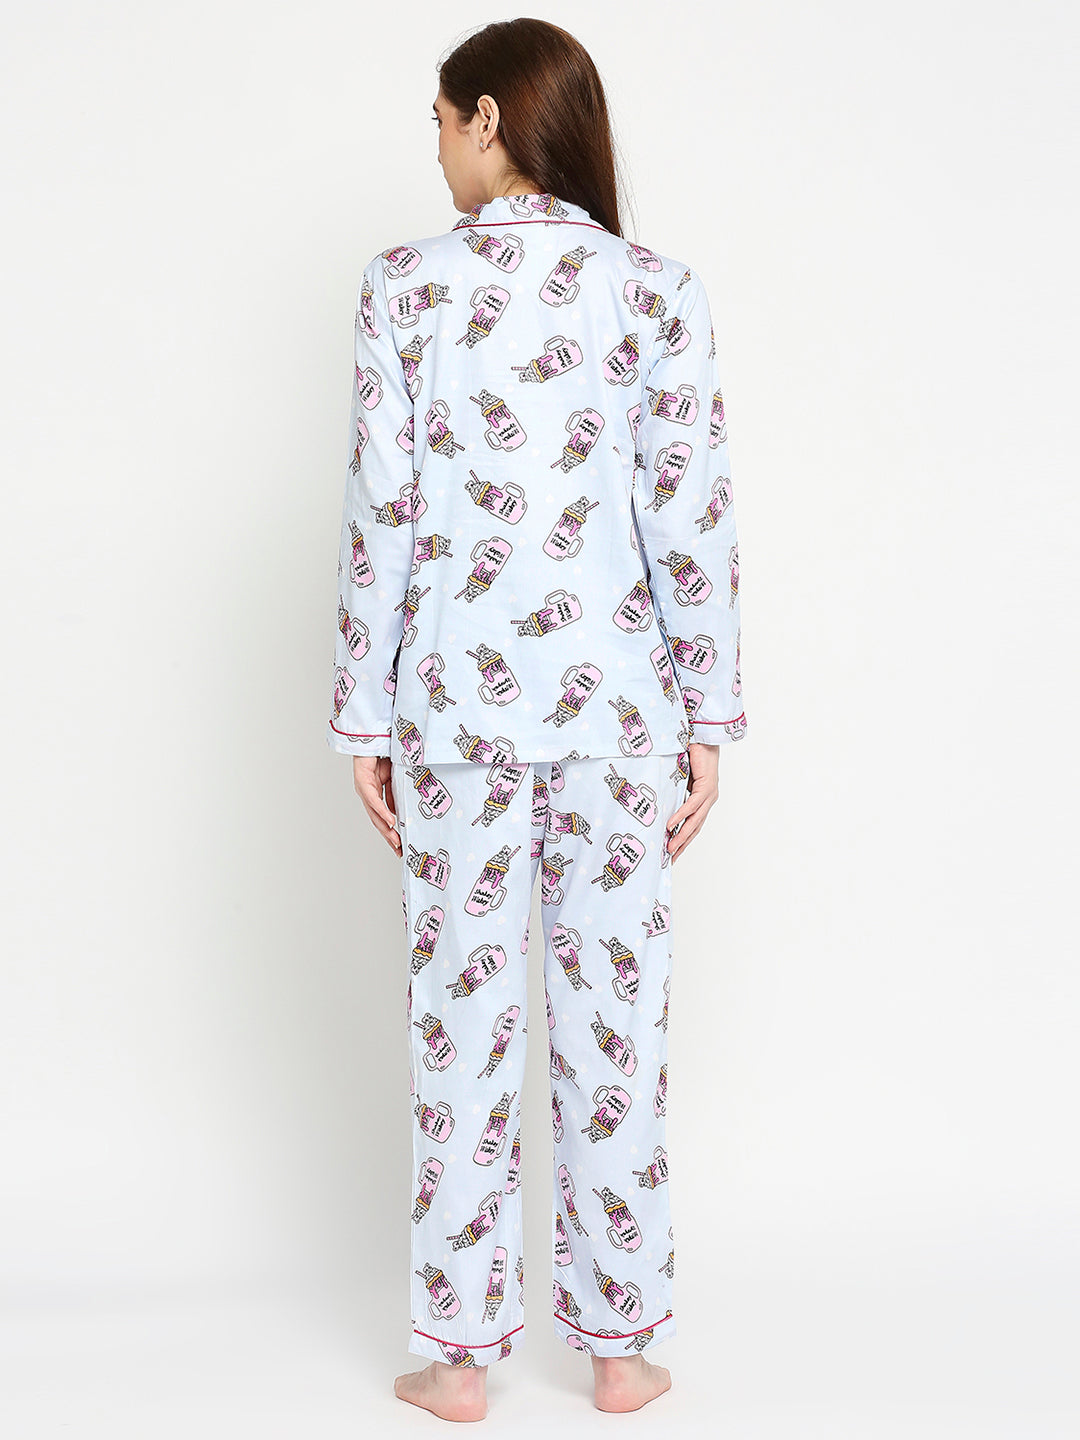 Shakey Wakey Button Down Pj Set - Pure Cotton Pj Set with Notched Collar